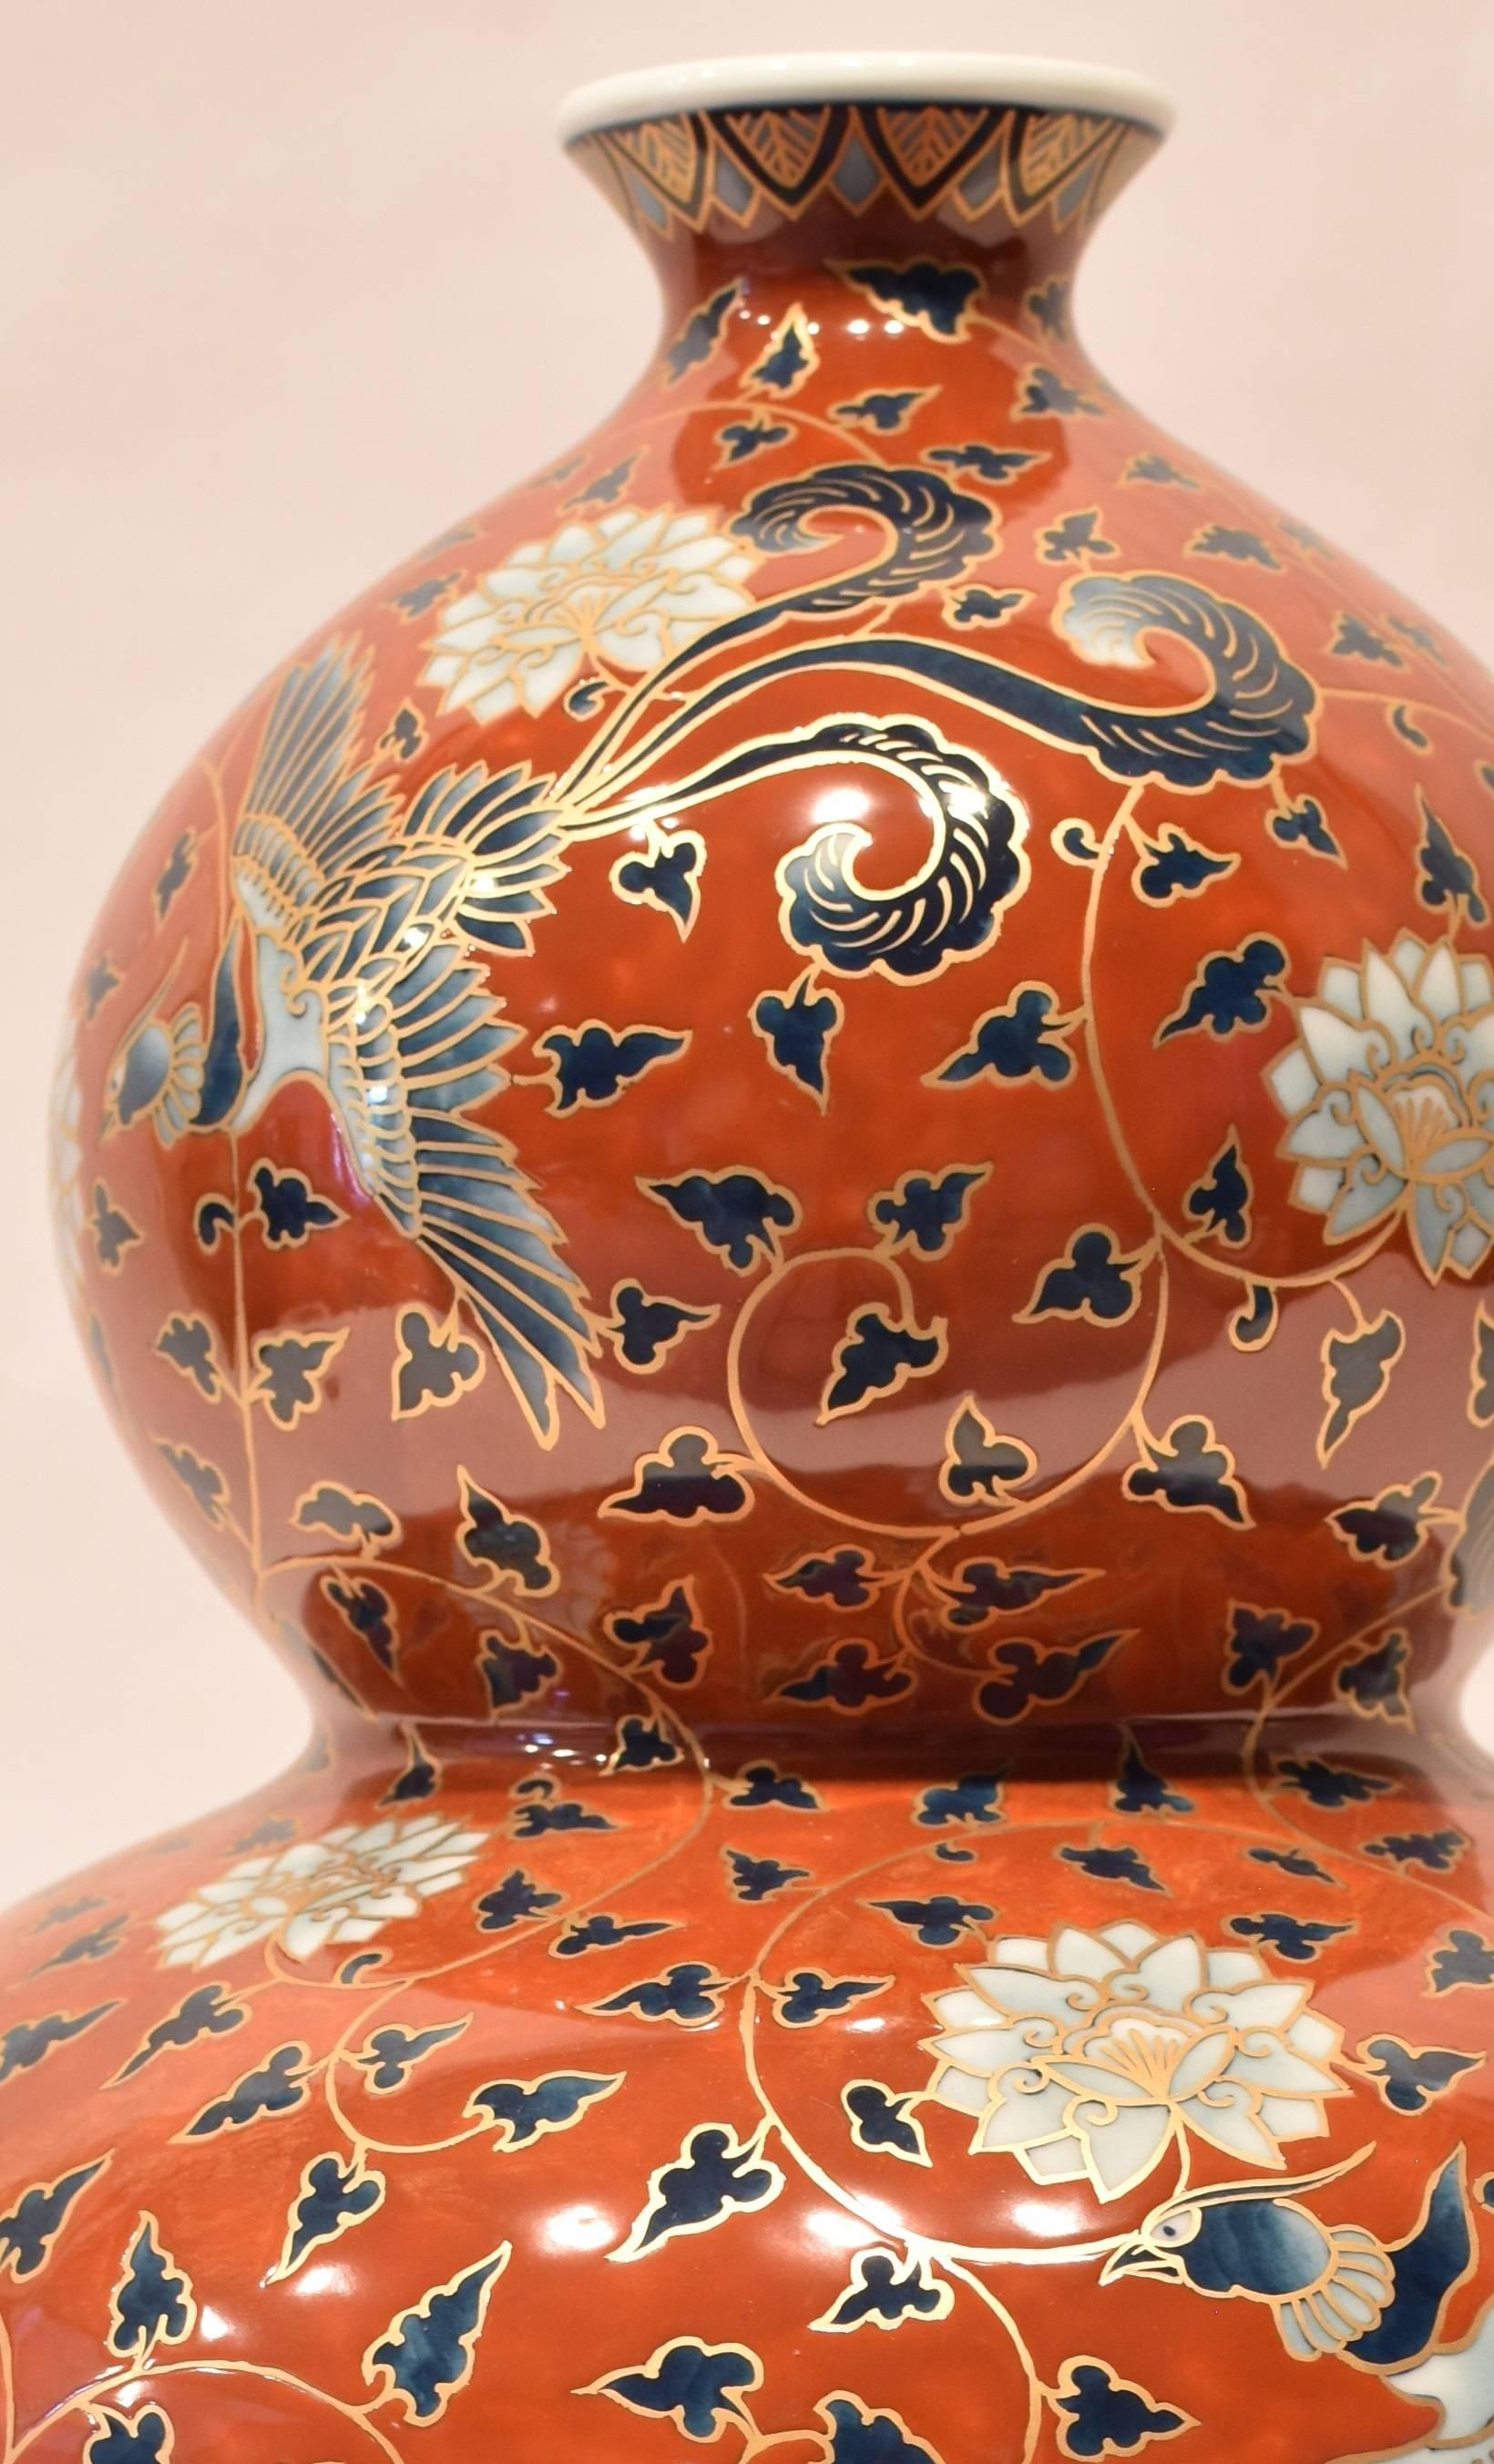 This unique striking hand-painted contemporary Japanese porcelain vase is presented in an auspicious double-gourd form in red and combines an arabesque motif with birds and flowers set against a brilliant red background. It highlights highly ornate